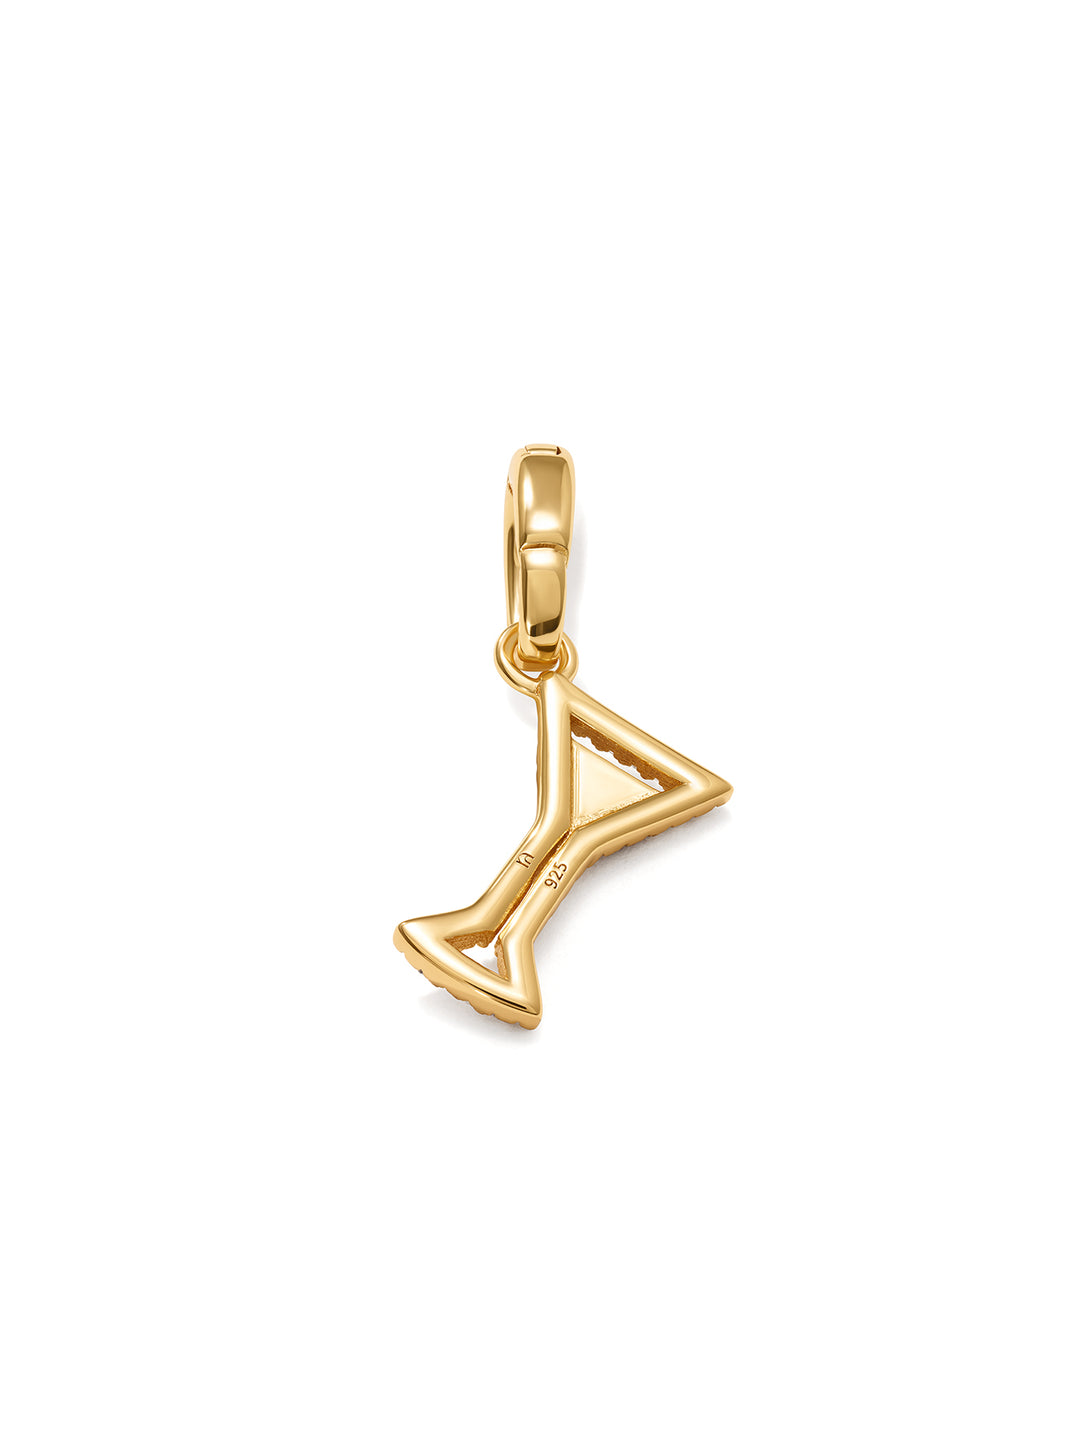 MARTINI - Charm • Color: 18K Yellow Gold